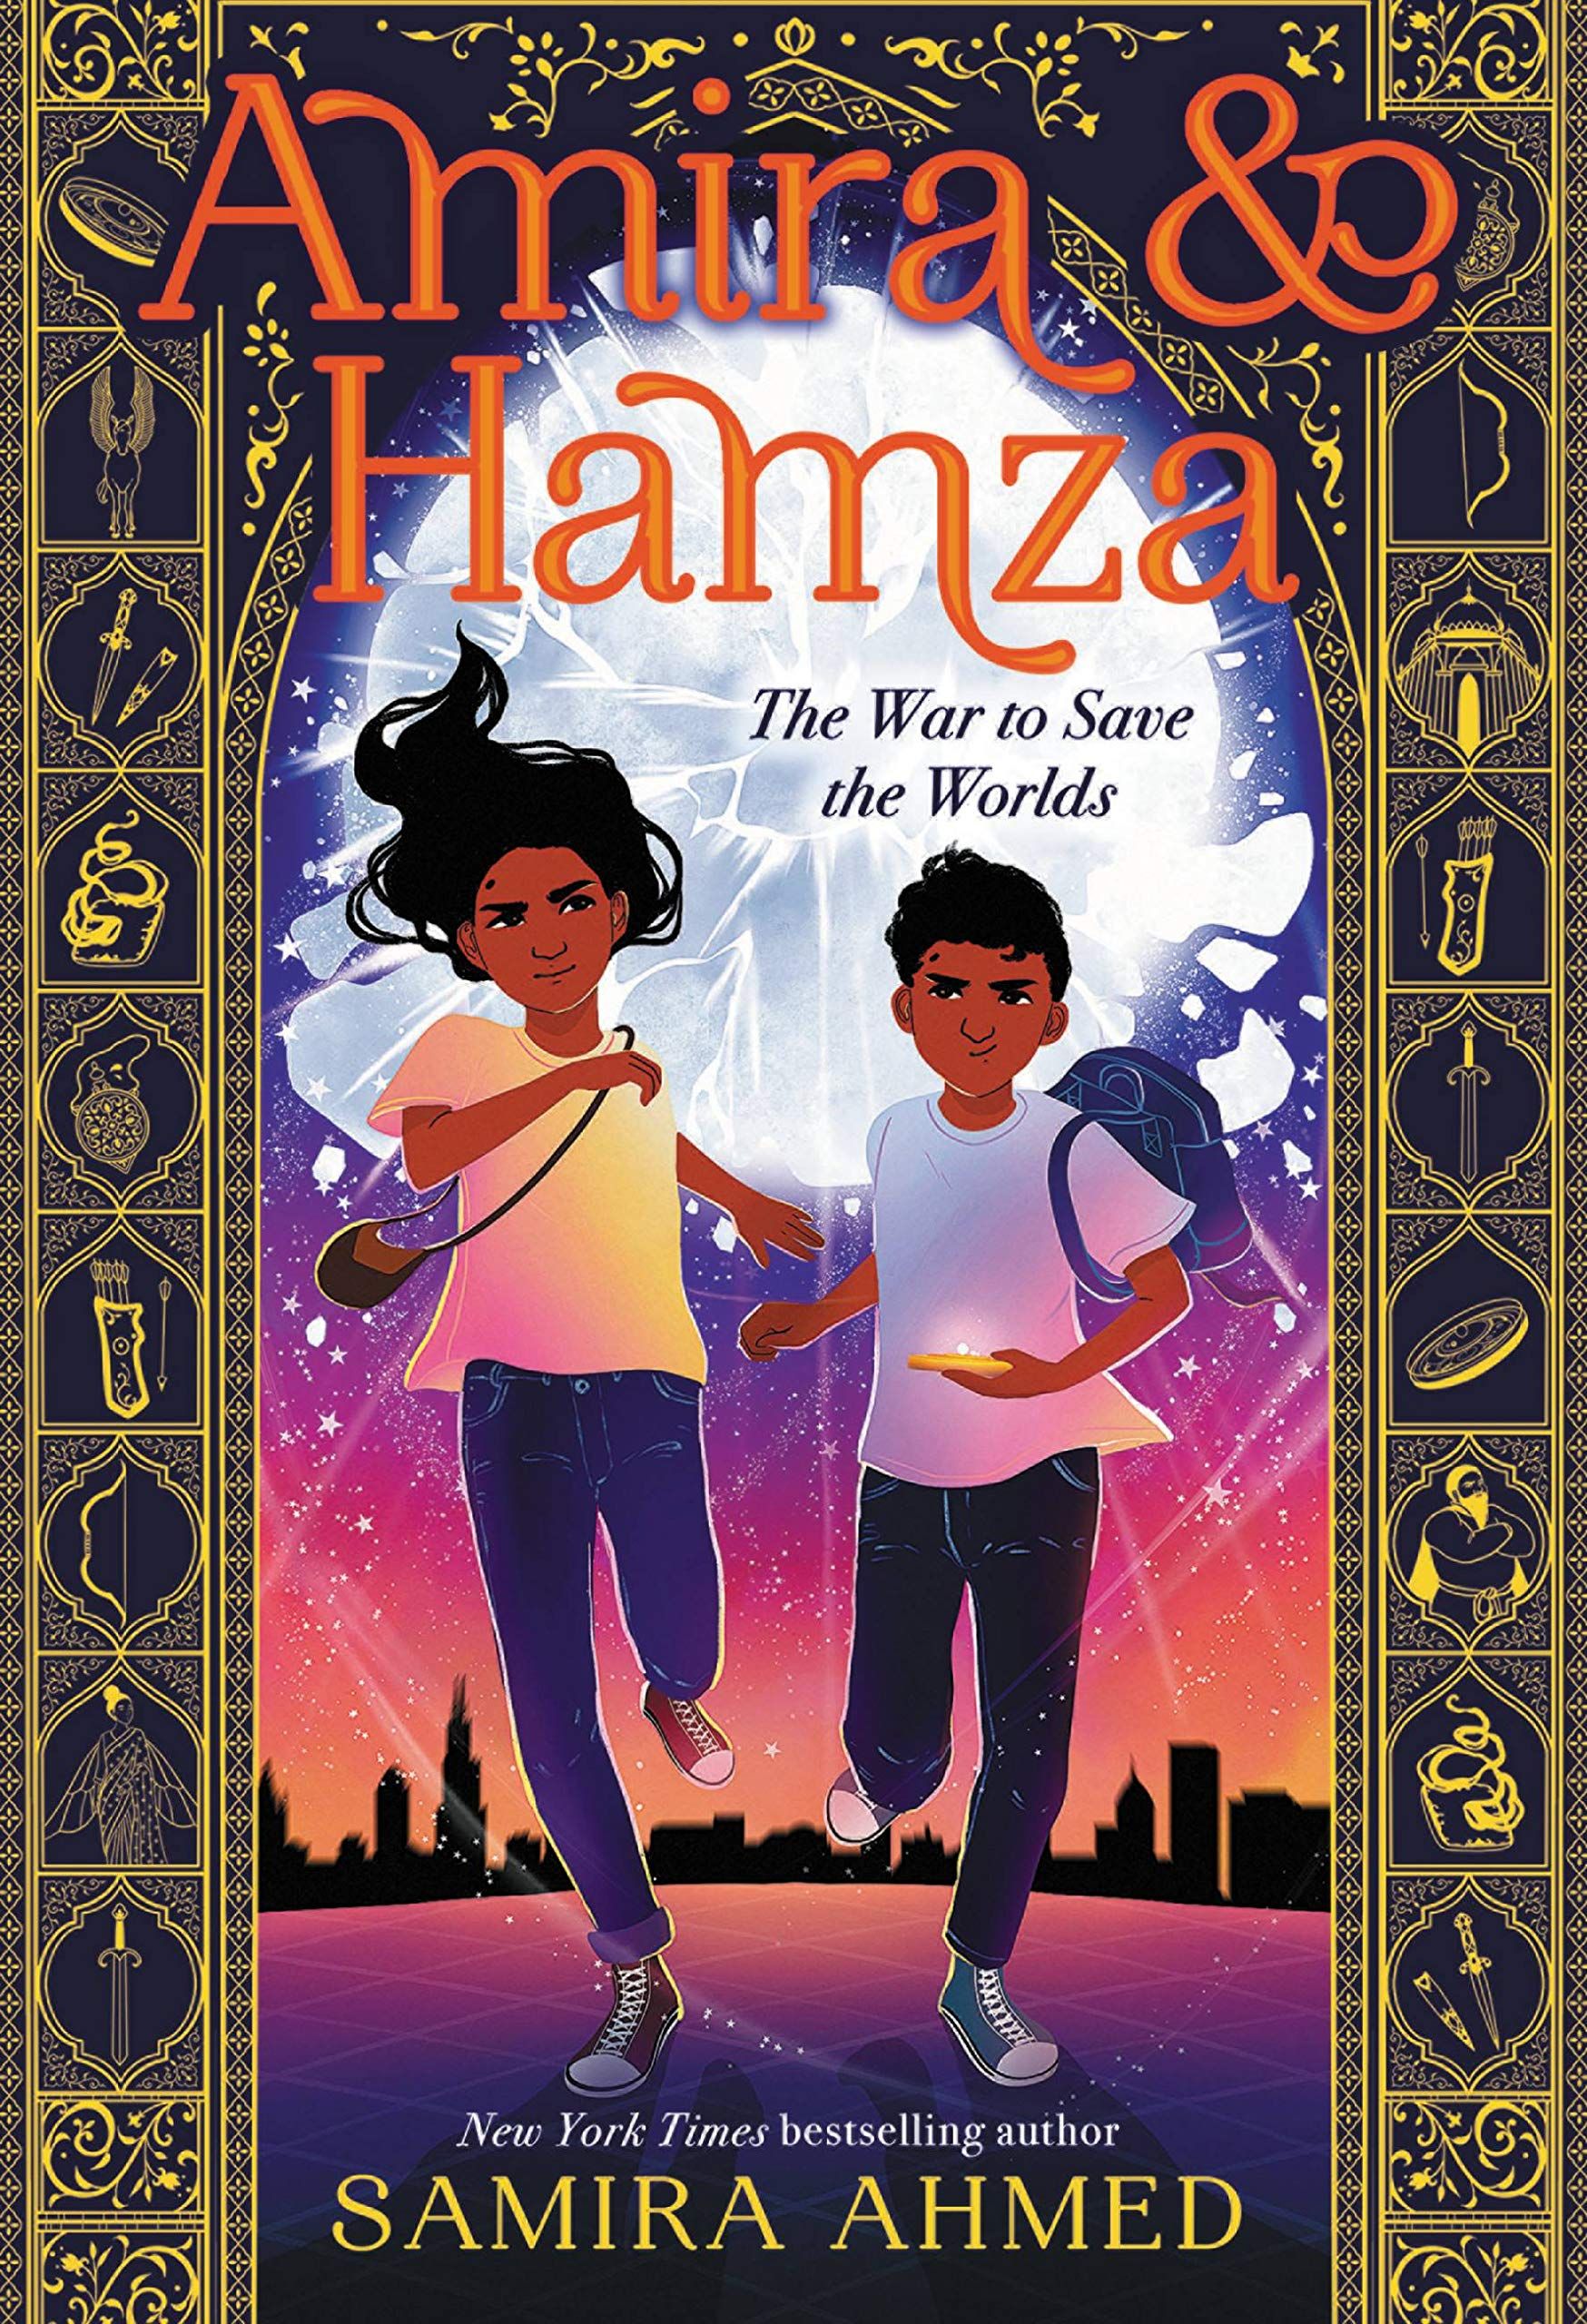 The Best Middle Grade Fantasy Series to Discover Right Now